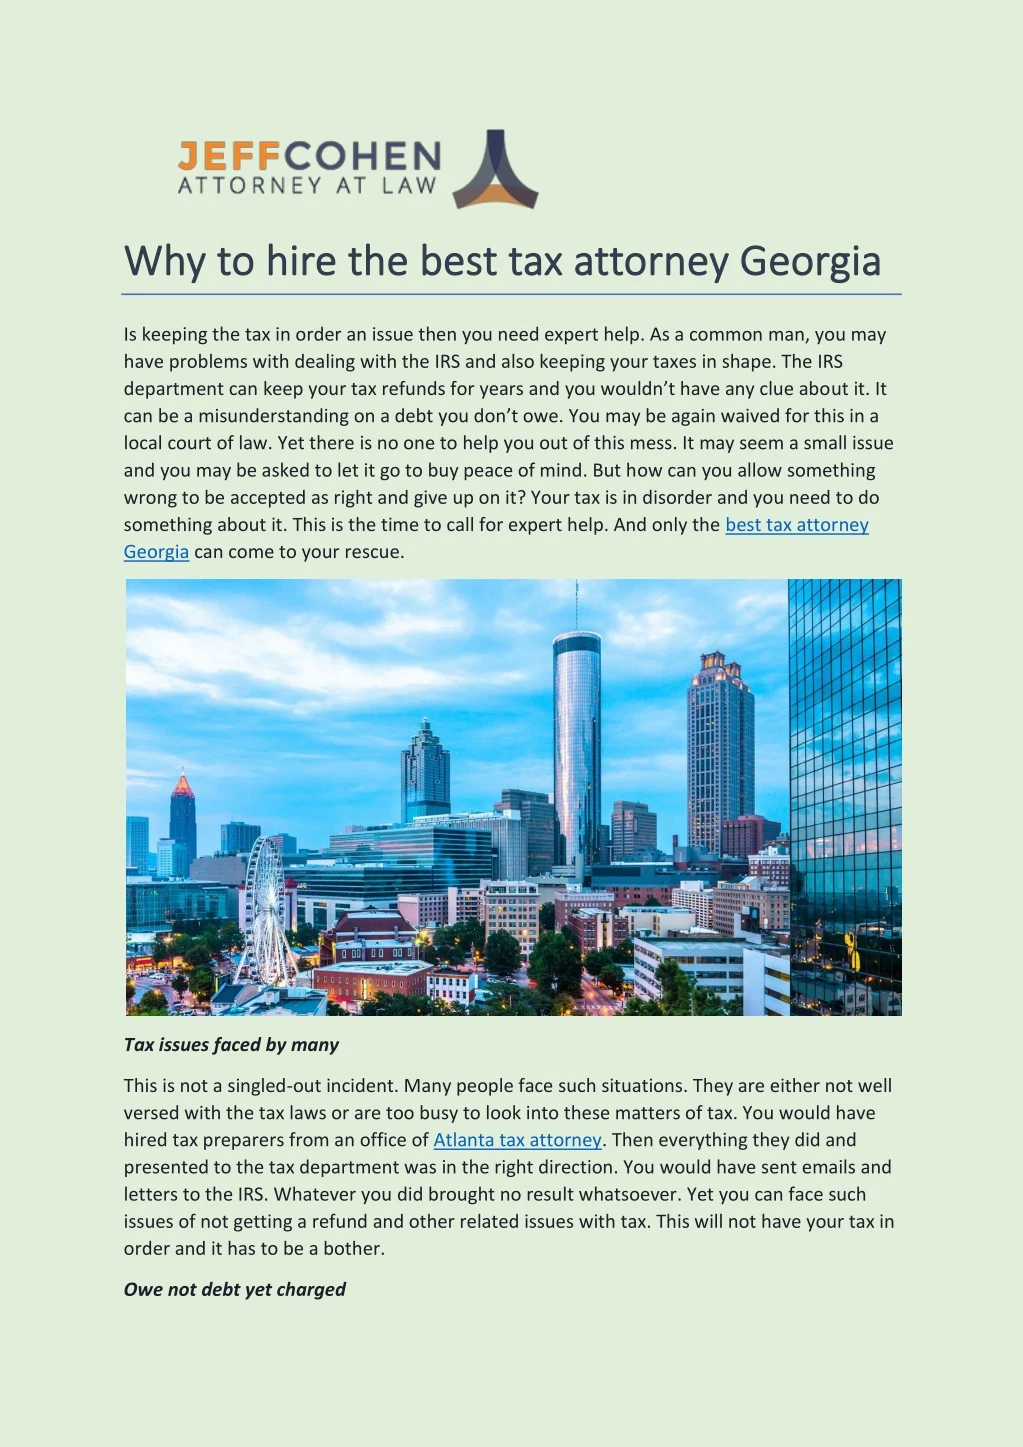 why to hire the best tax attorney georgia